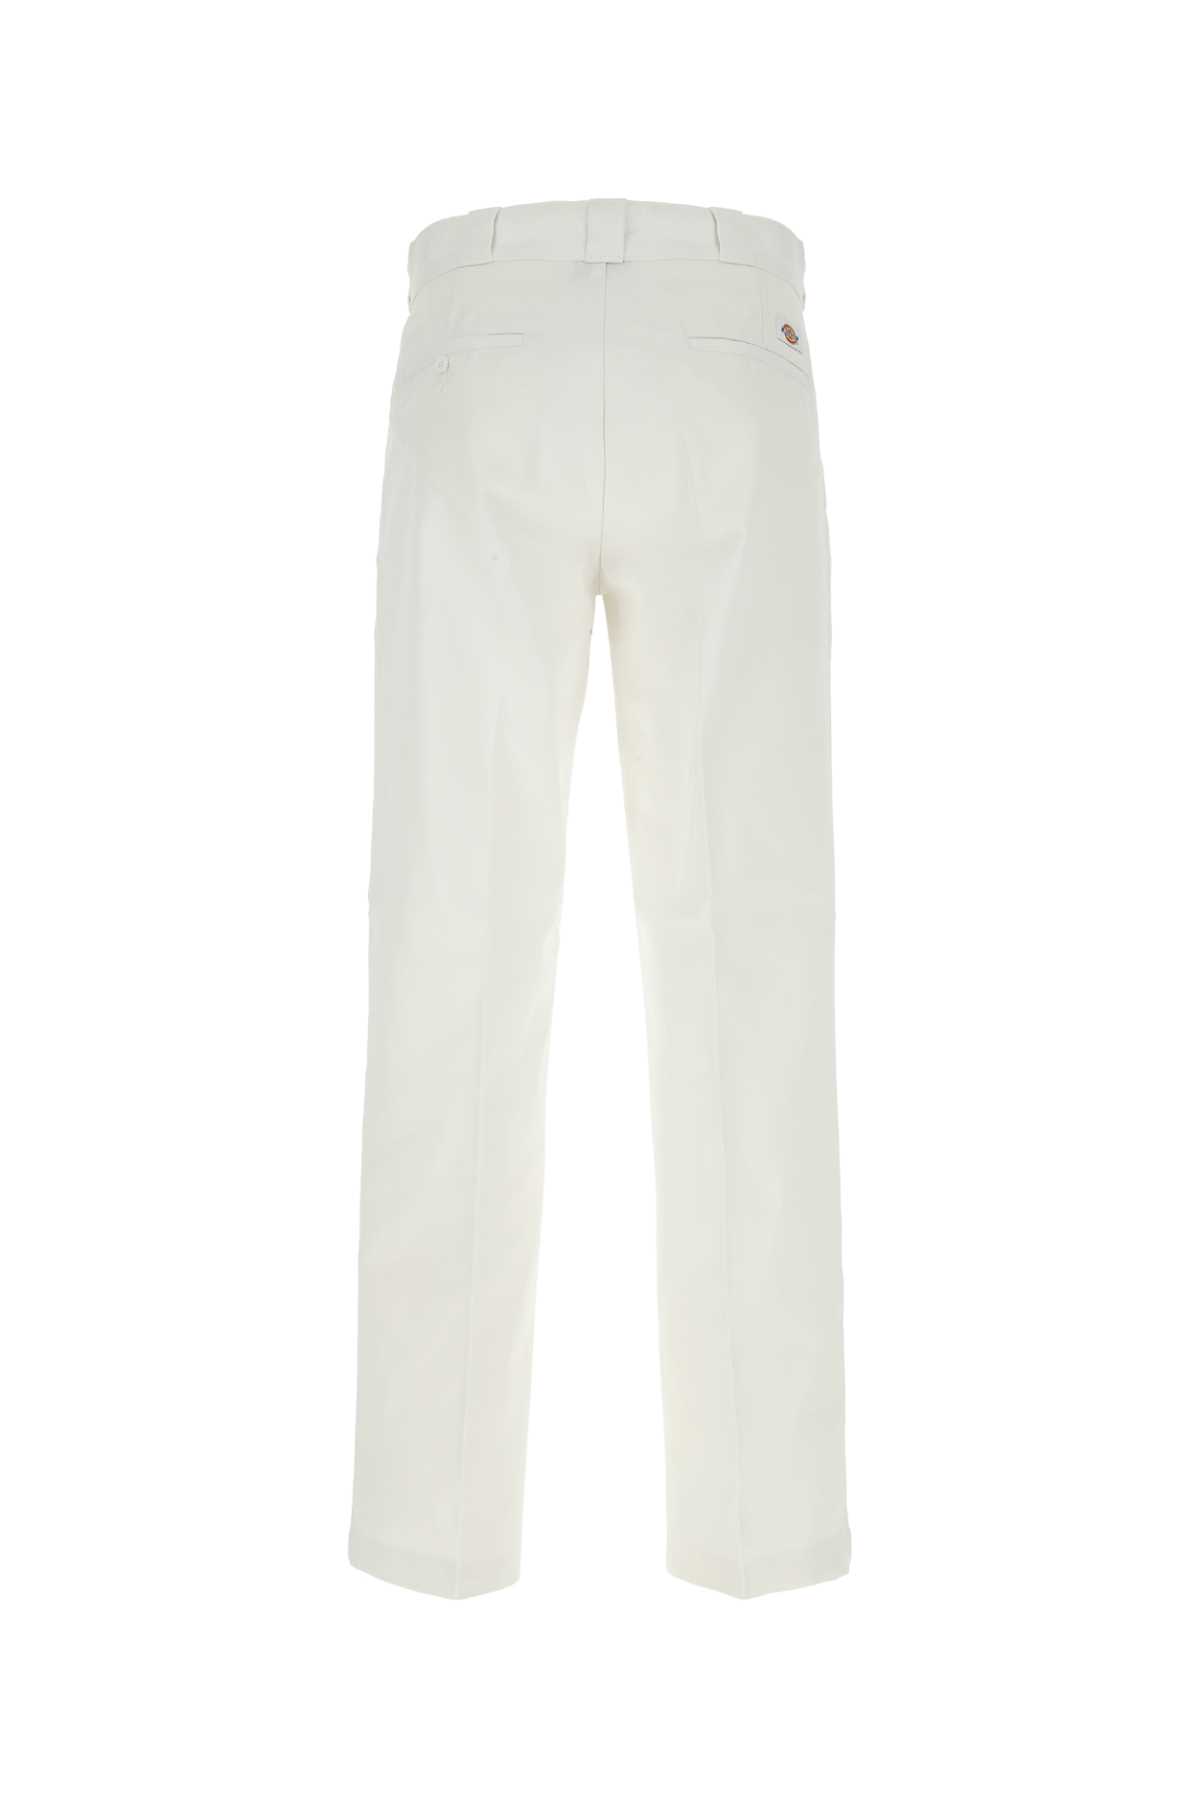 Dickies White Polyester Blend Pant In Whx1